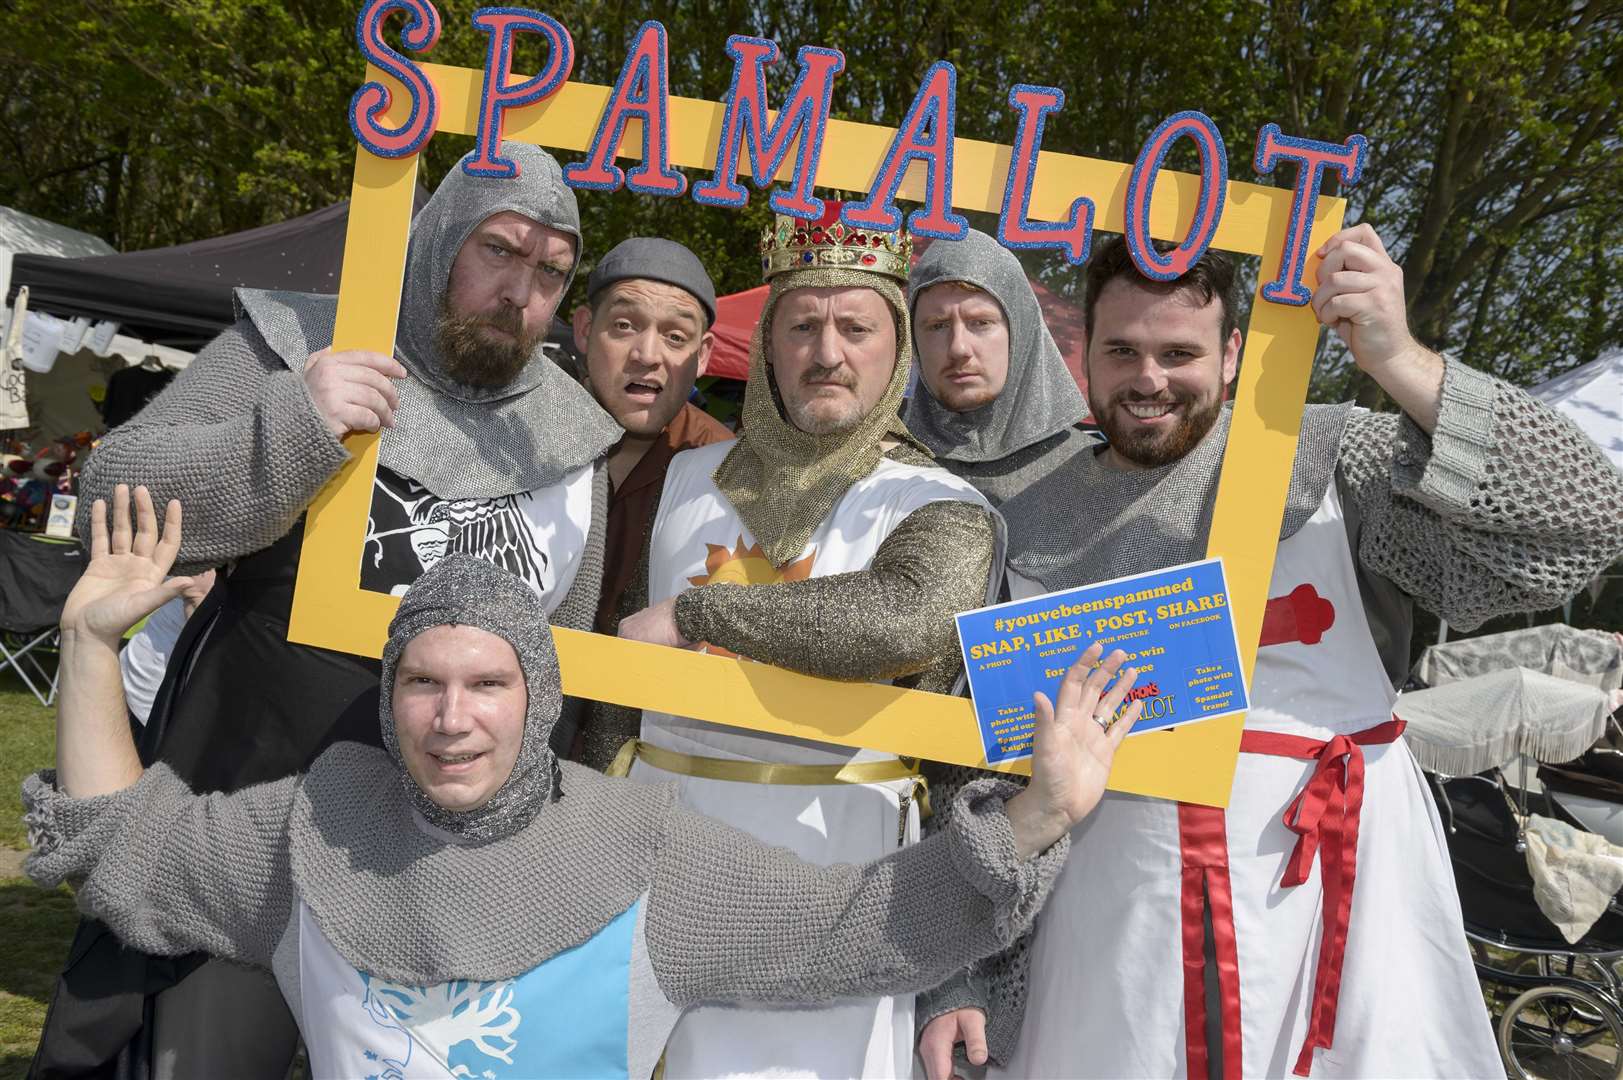 Arthur and his knights, the cast of the Kentish Players version of Spamalot at last year's English Festival